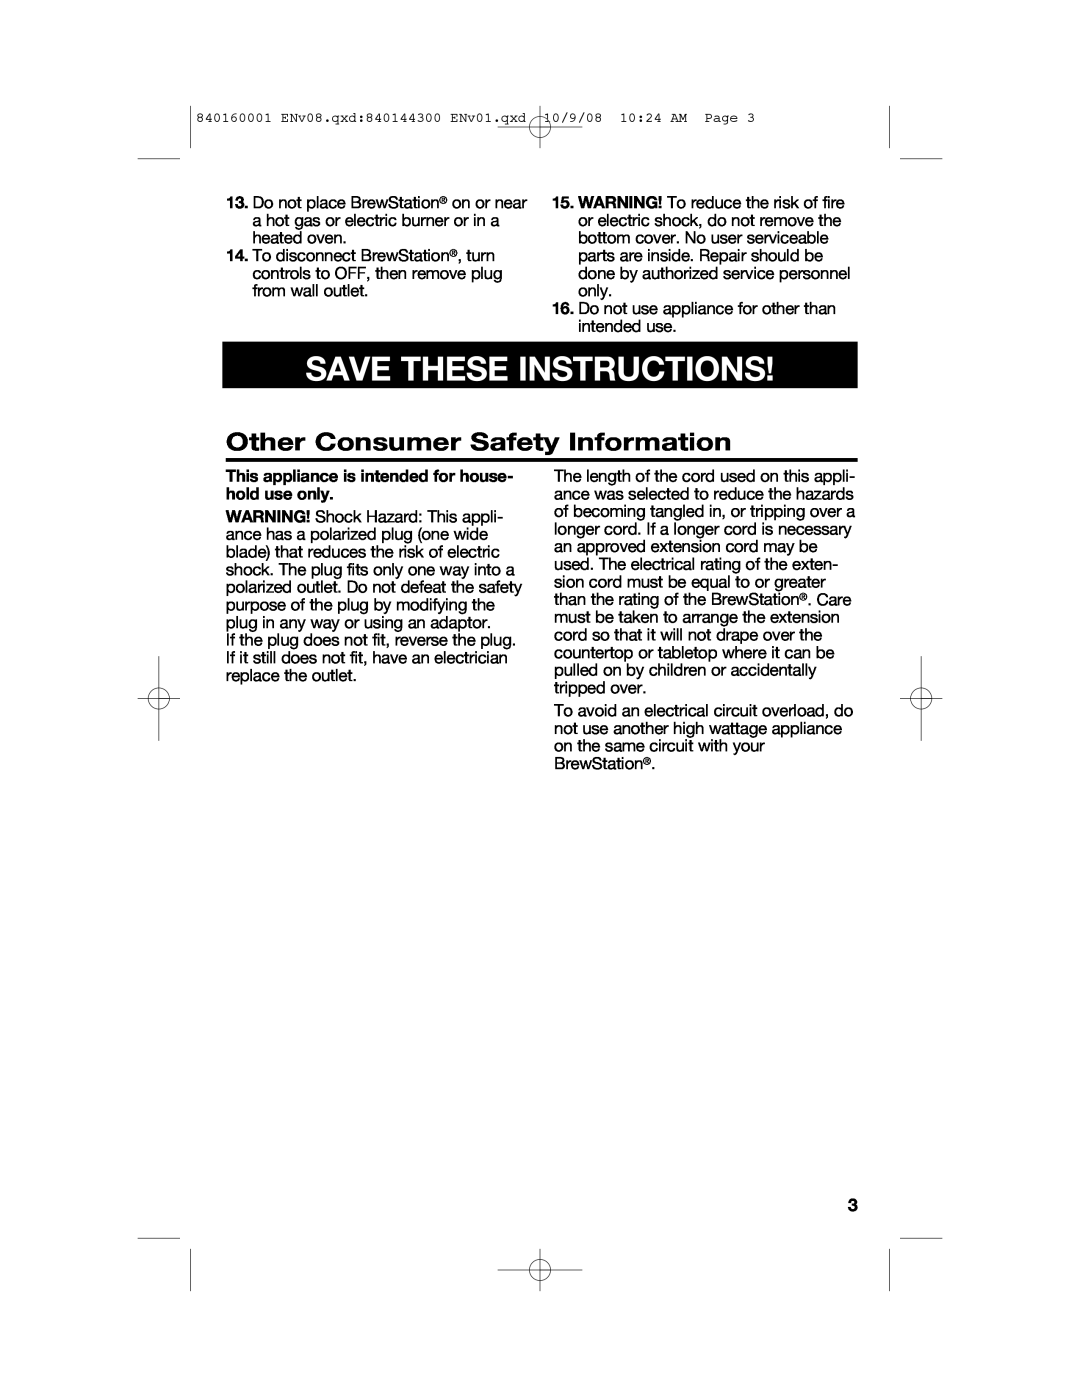 Hamilton Beach 47214 manual Save These Instructions, Other Consumer Safety Information 